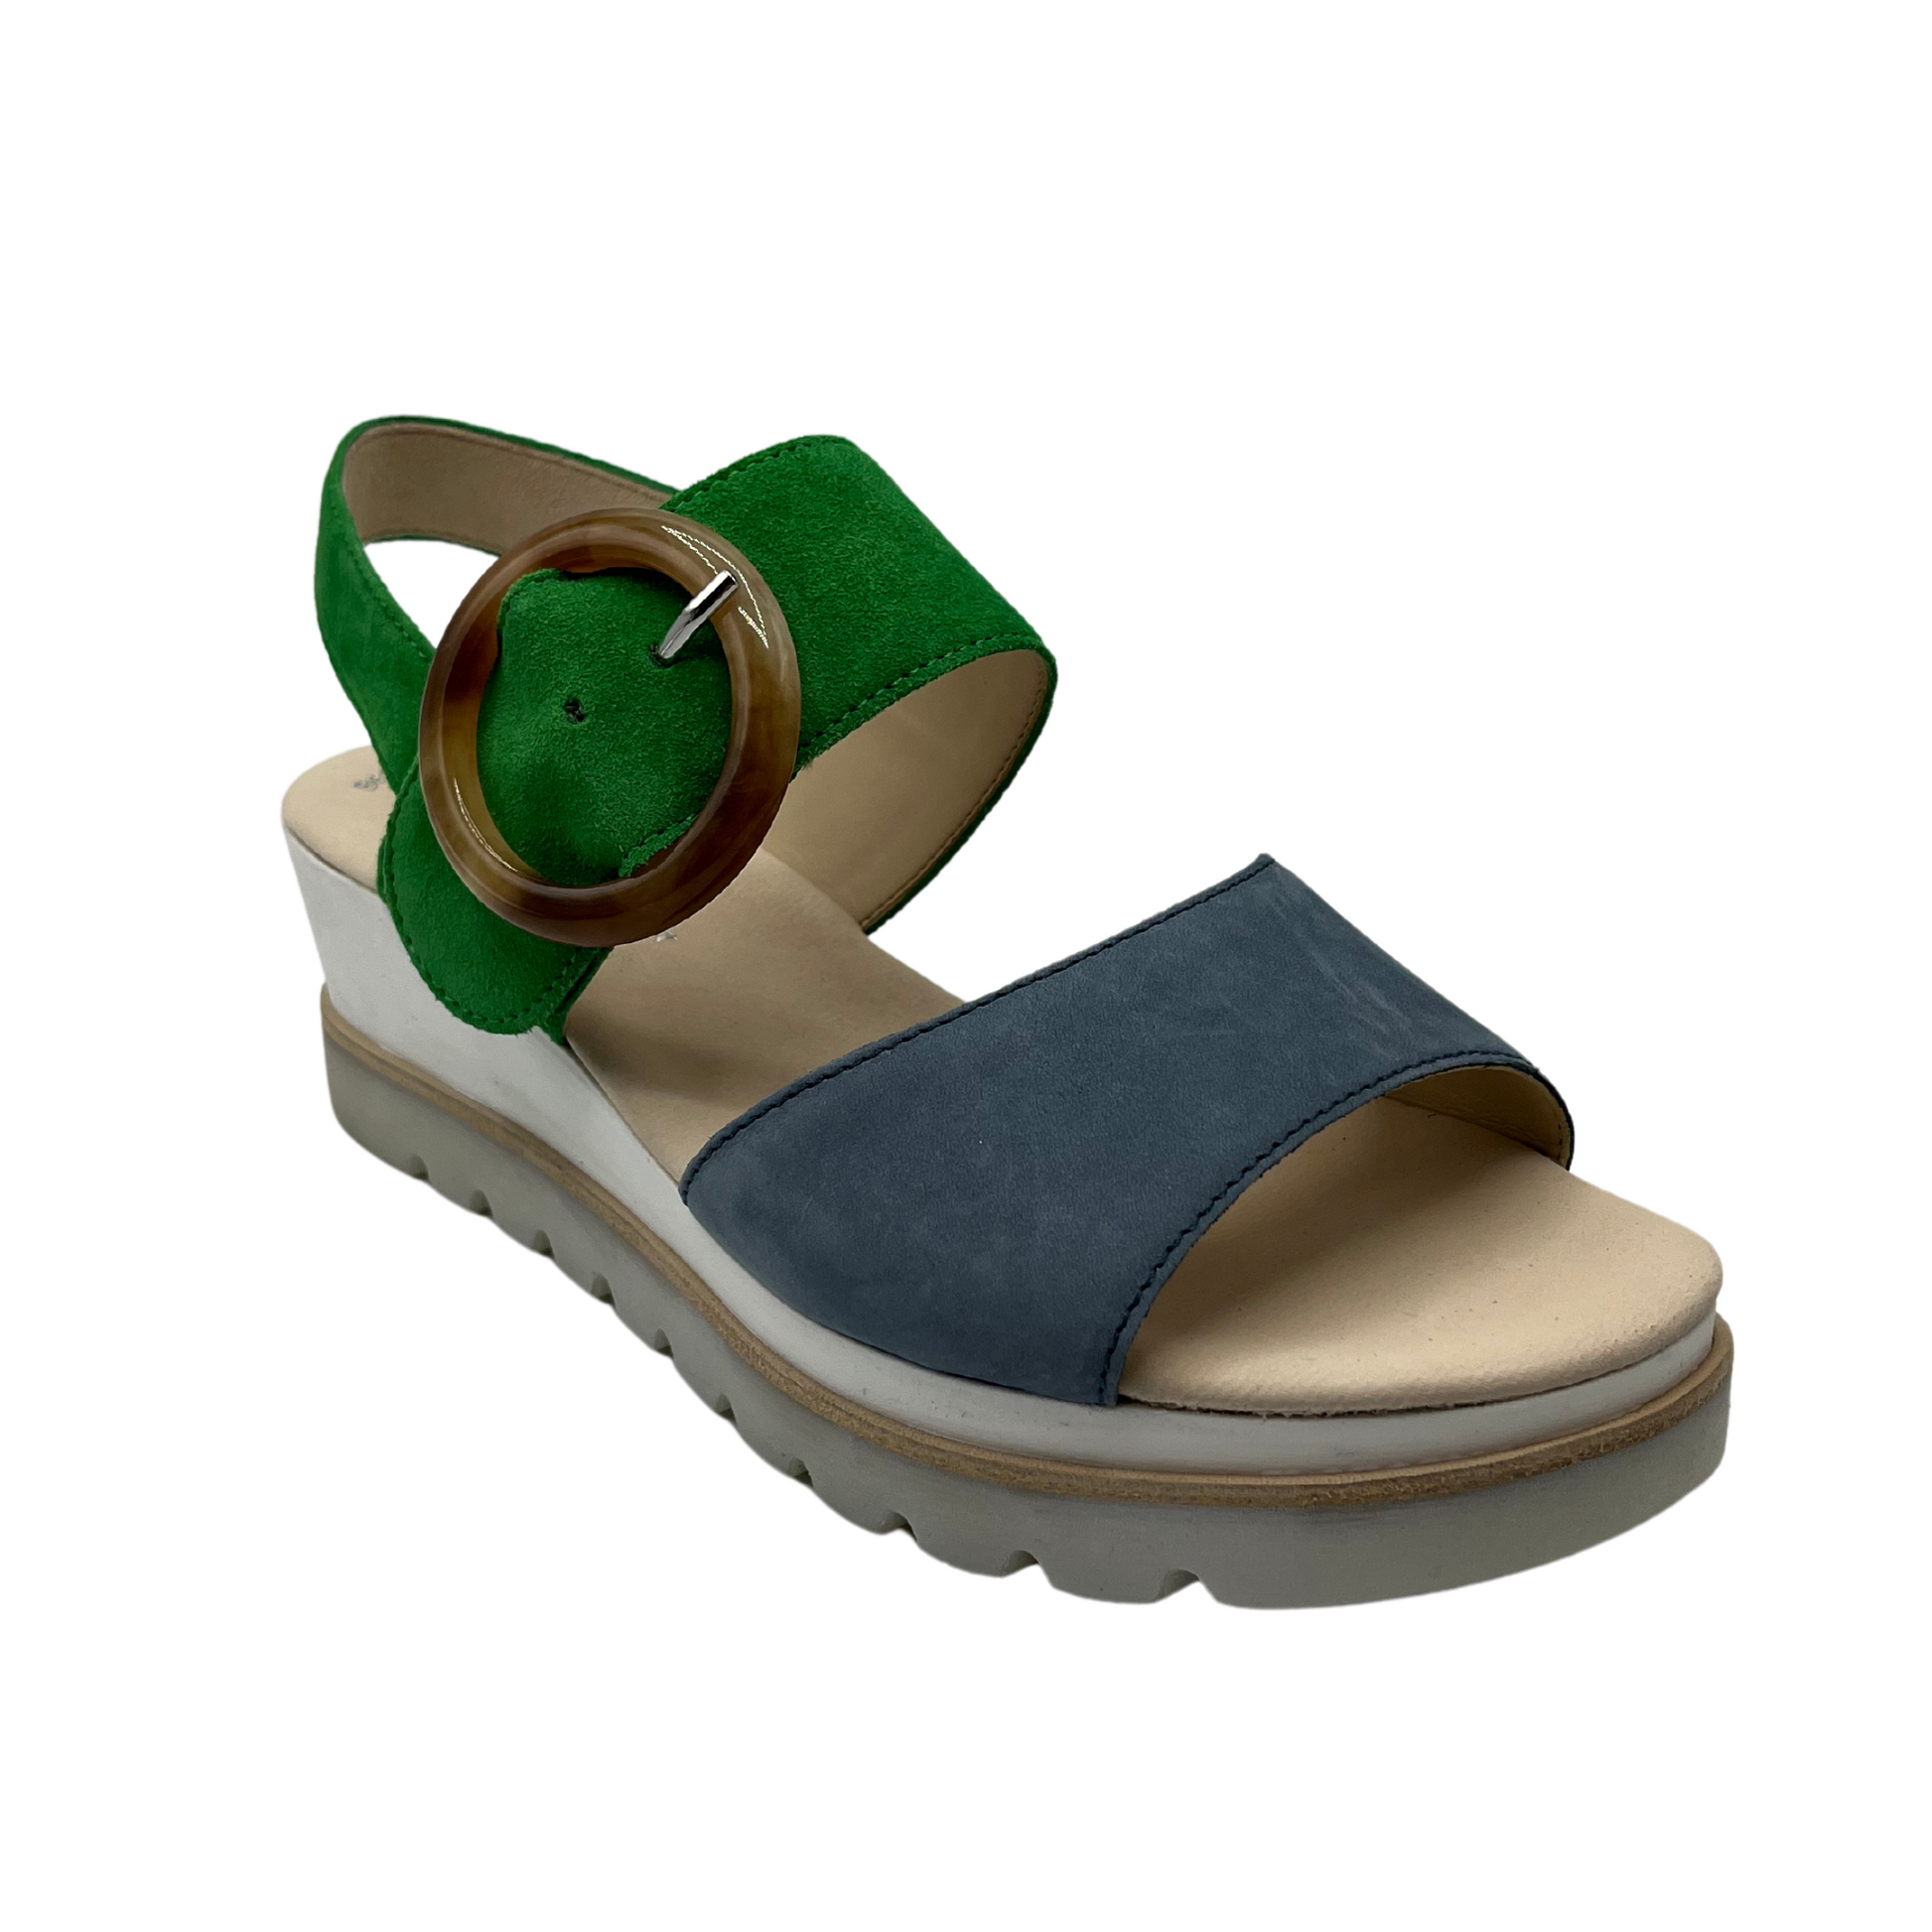 45 degree angled view of blue and green wedge heeled sandal with open toe and tortoise pattern buckle on ankle